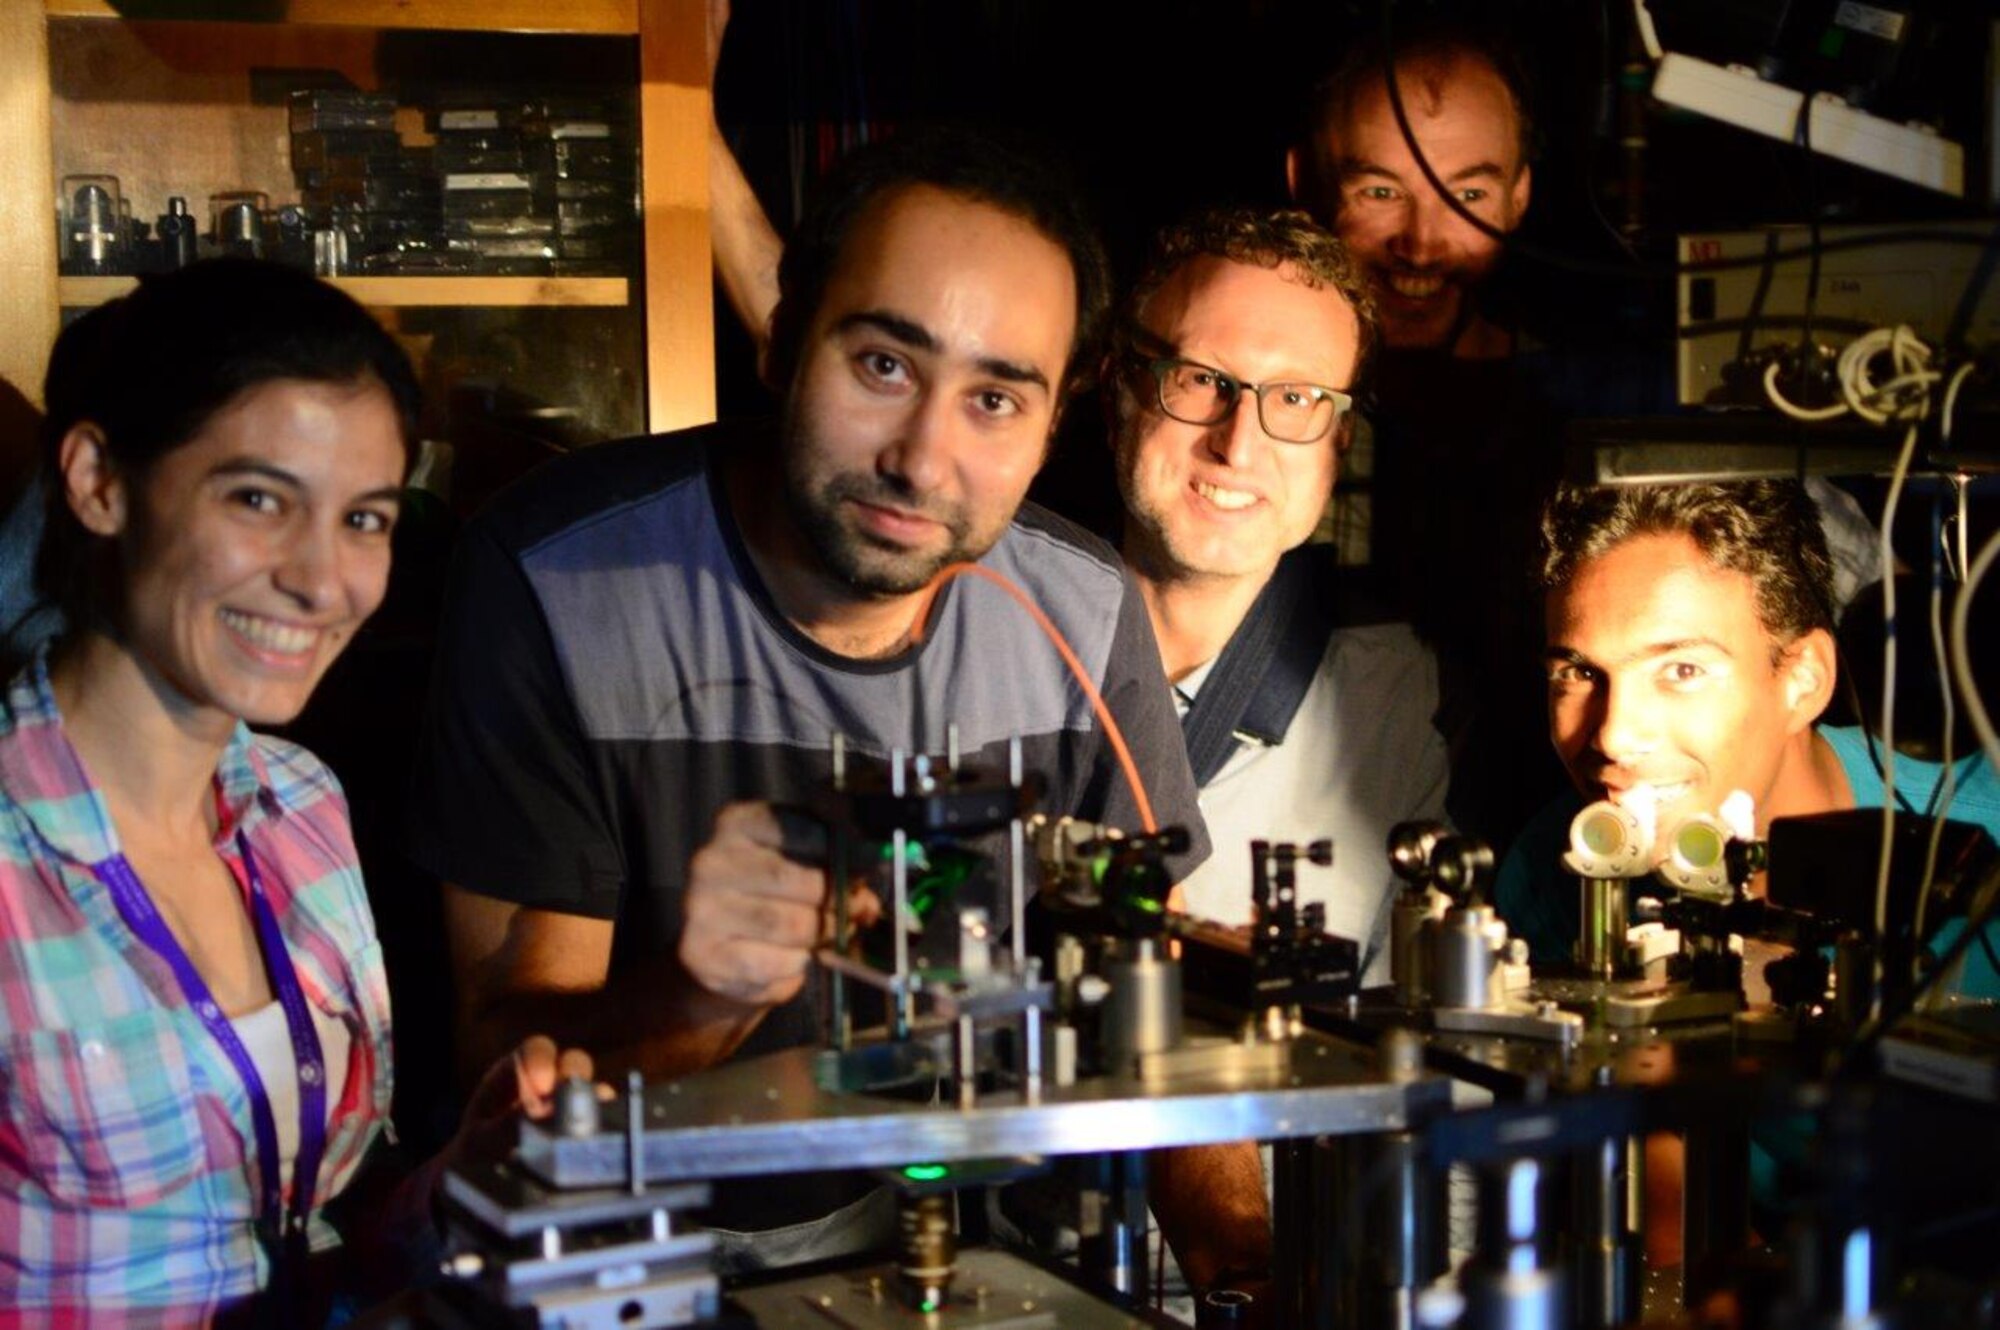 Researchers Catxere Casacio, Waleed Muhammad, Warwick Bowen, Lars Madsen, and Nicholas Mauranyapin perform quantum optics experiments at the Laboratory for Translational Quantum Science, in the Australian Centre for Engineered Quantum Systems, University of Queensland on November 30, 2016. The experiments are being performed broadly to bring to bear techniques from quantum optics on the biological sciences and microscopy, with the goal of enhancing the resolution and speed of biological imaging and sensing.   (Courtesy photo / Erick Romero)